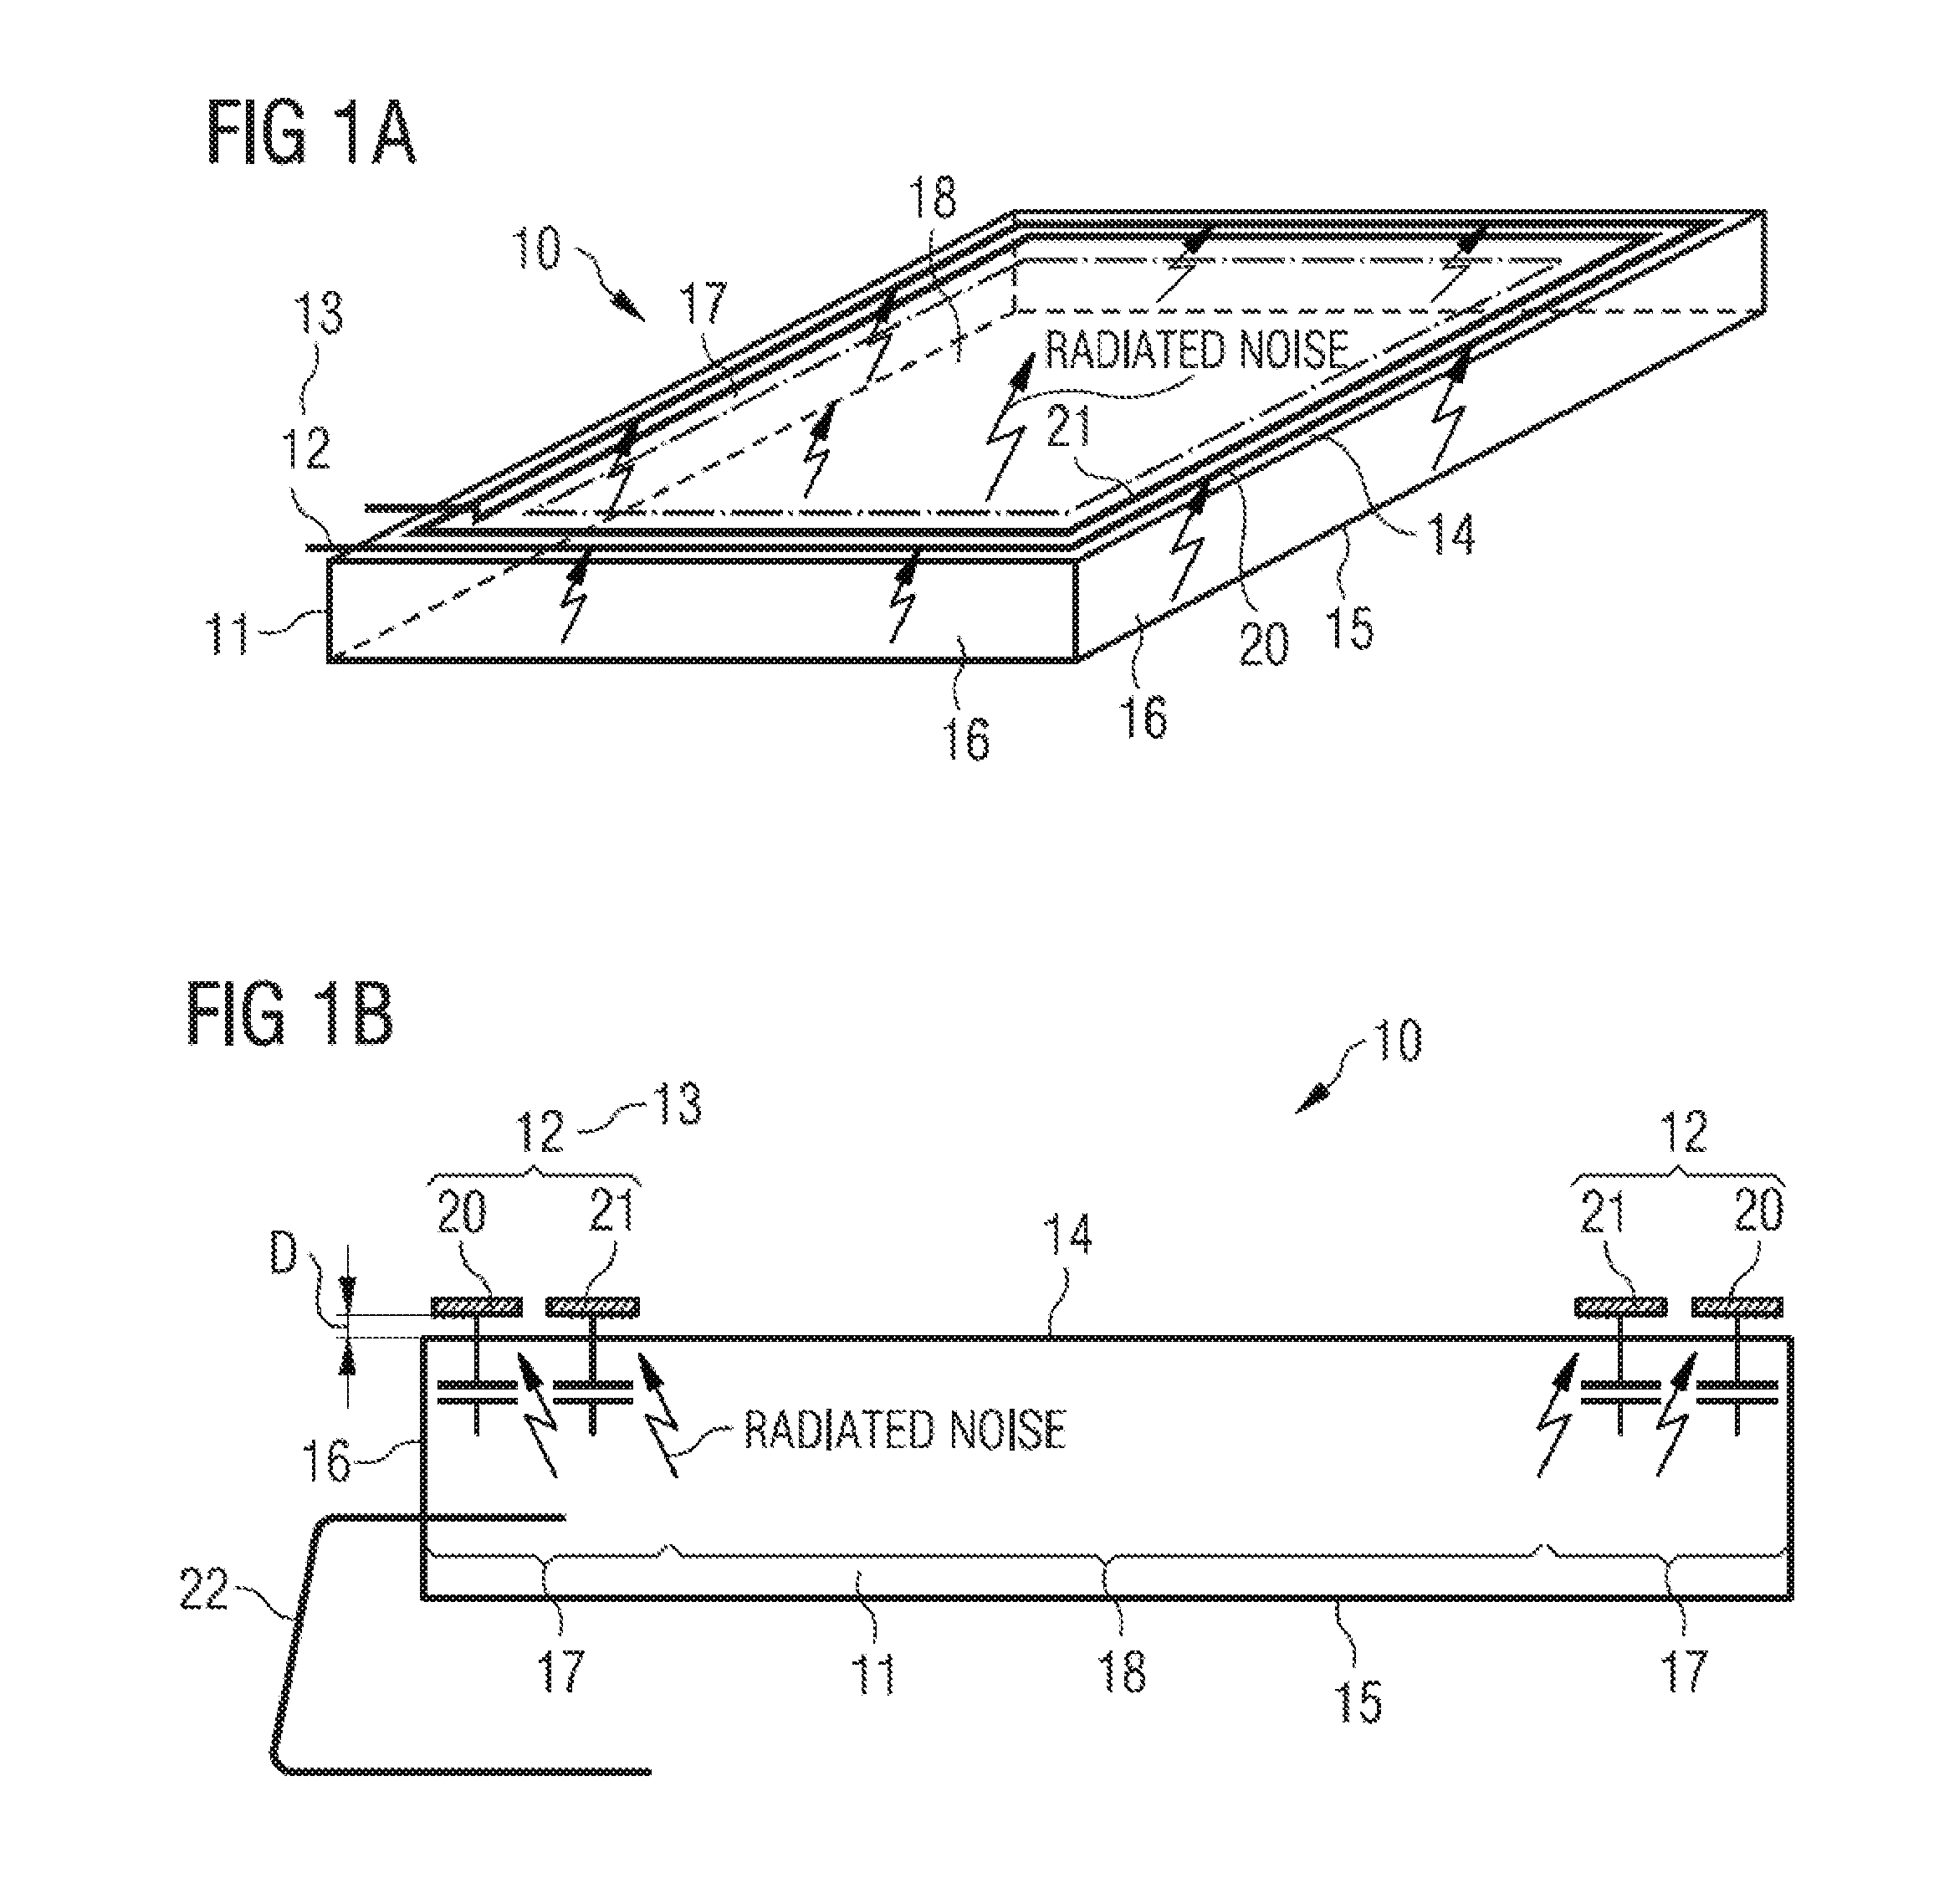 Display arrangement and method for fabrication of a display arrangement